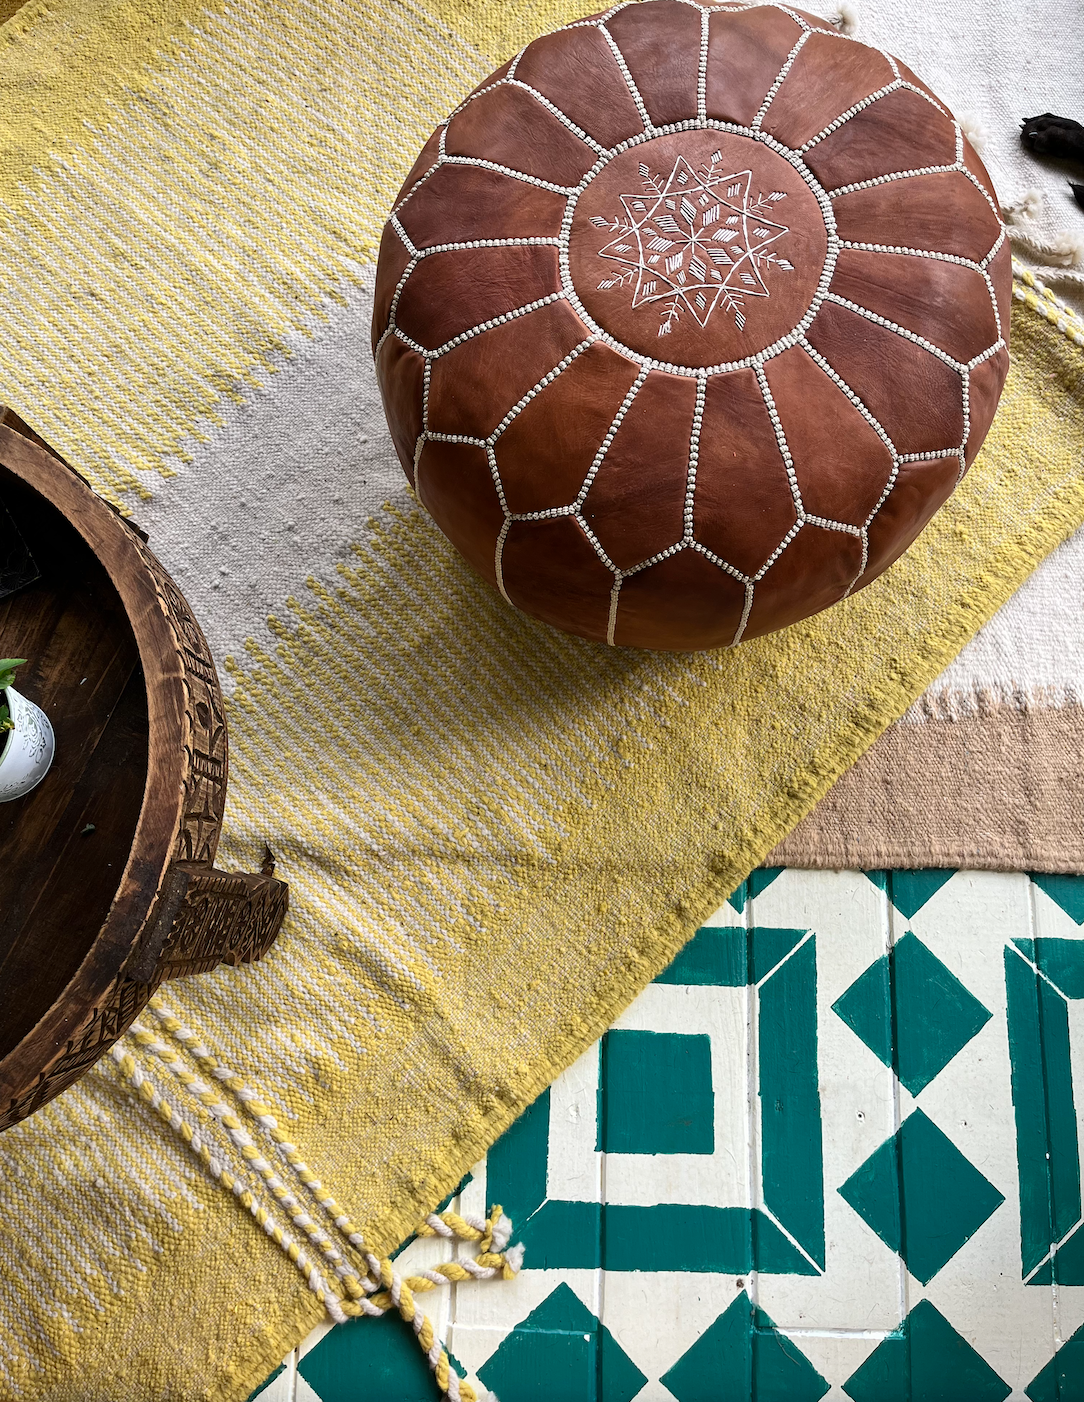 Moroccan Home Decor Styles: Colors, Patterns, and Materials